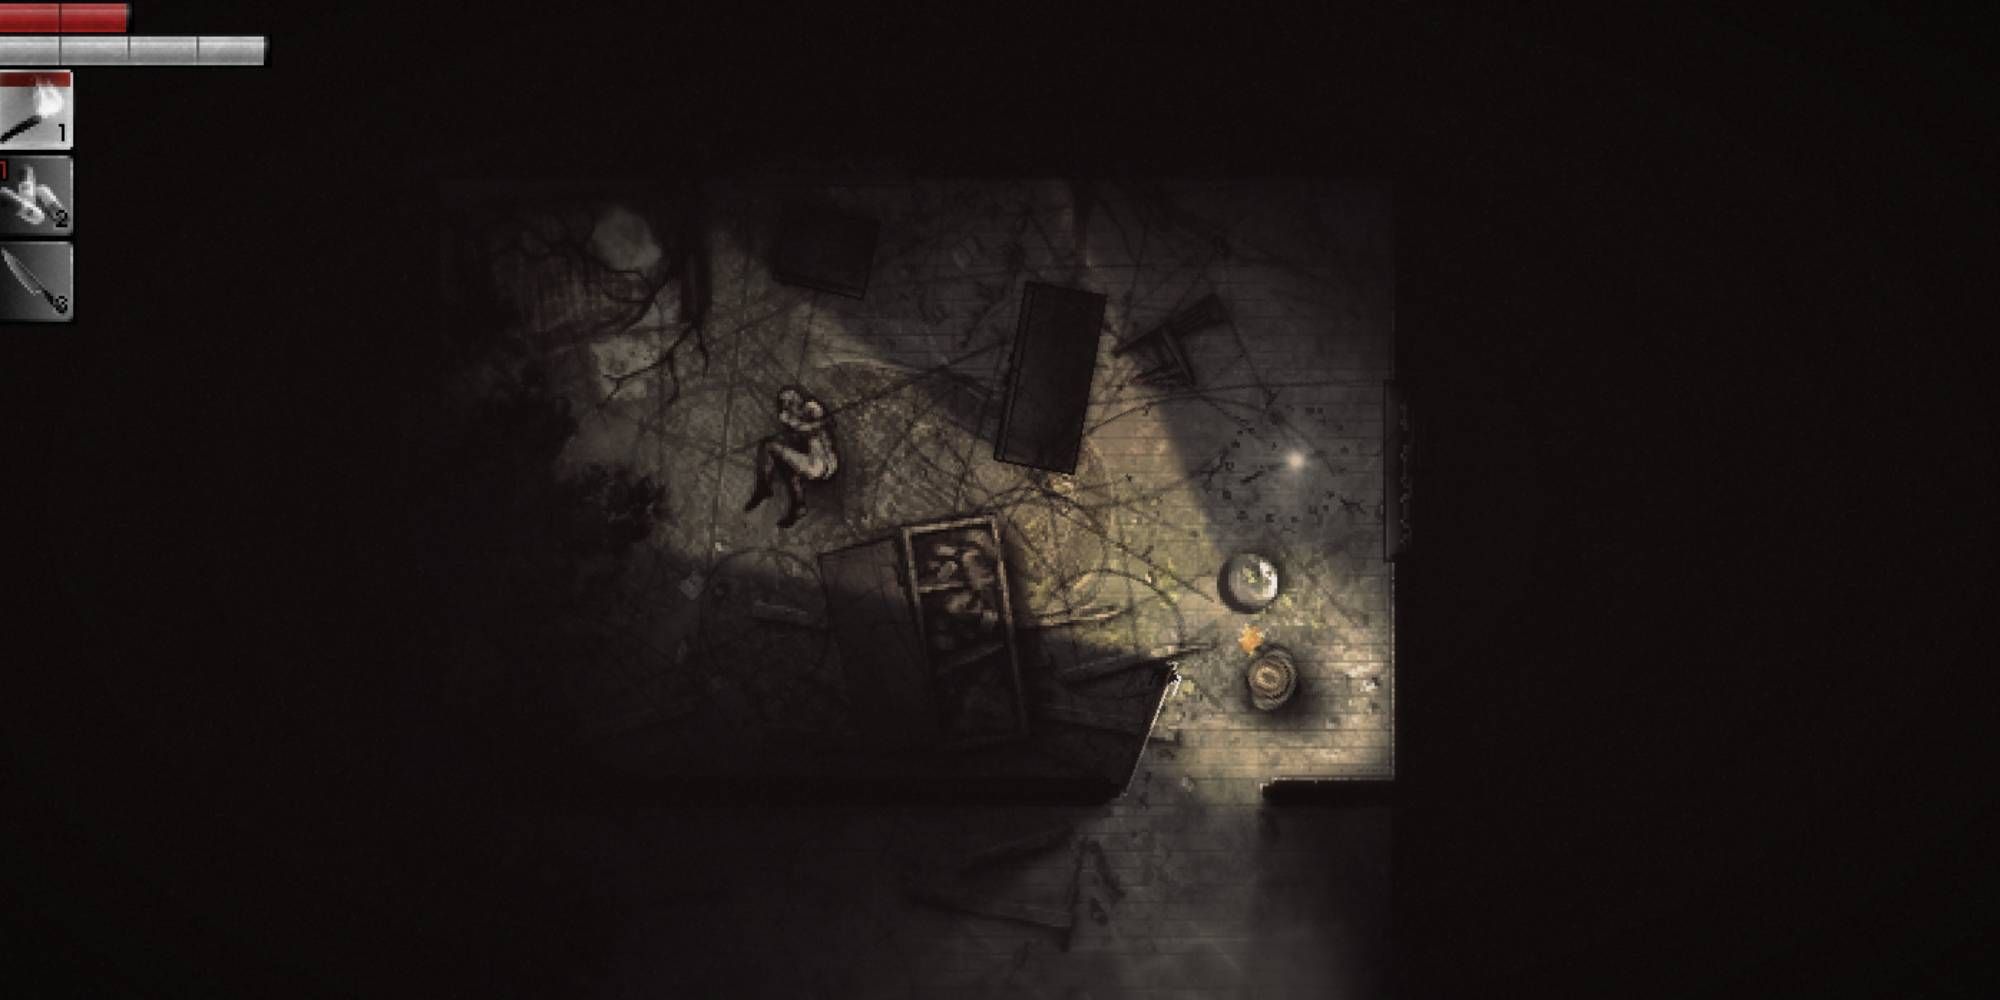 The player is in the game view in a dark room containing some fallen furniture and lit only by a hand lamp